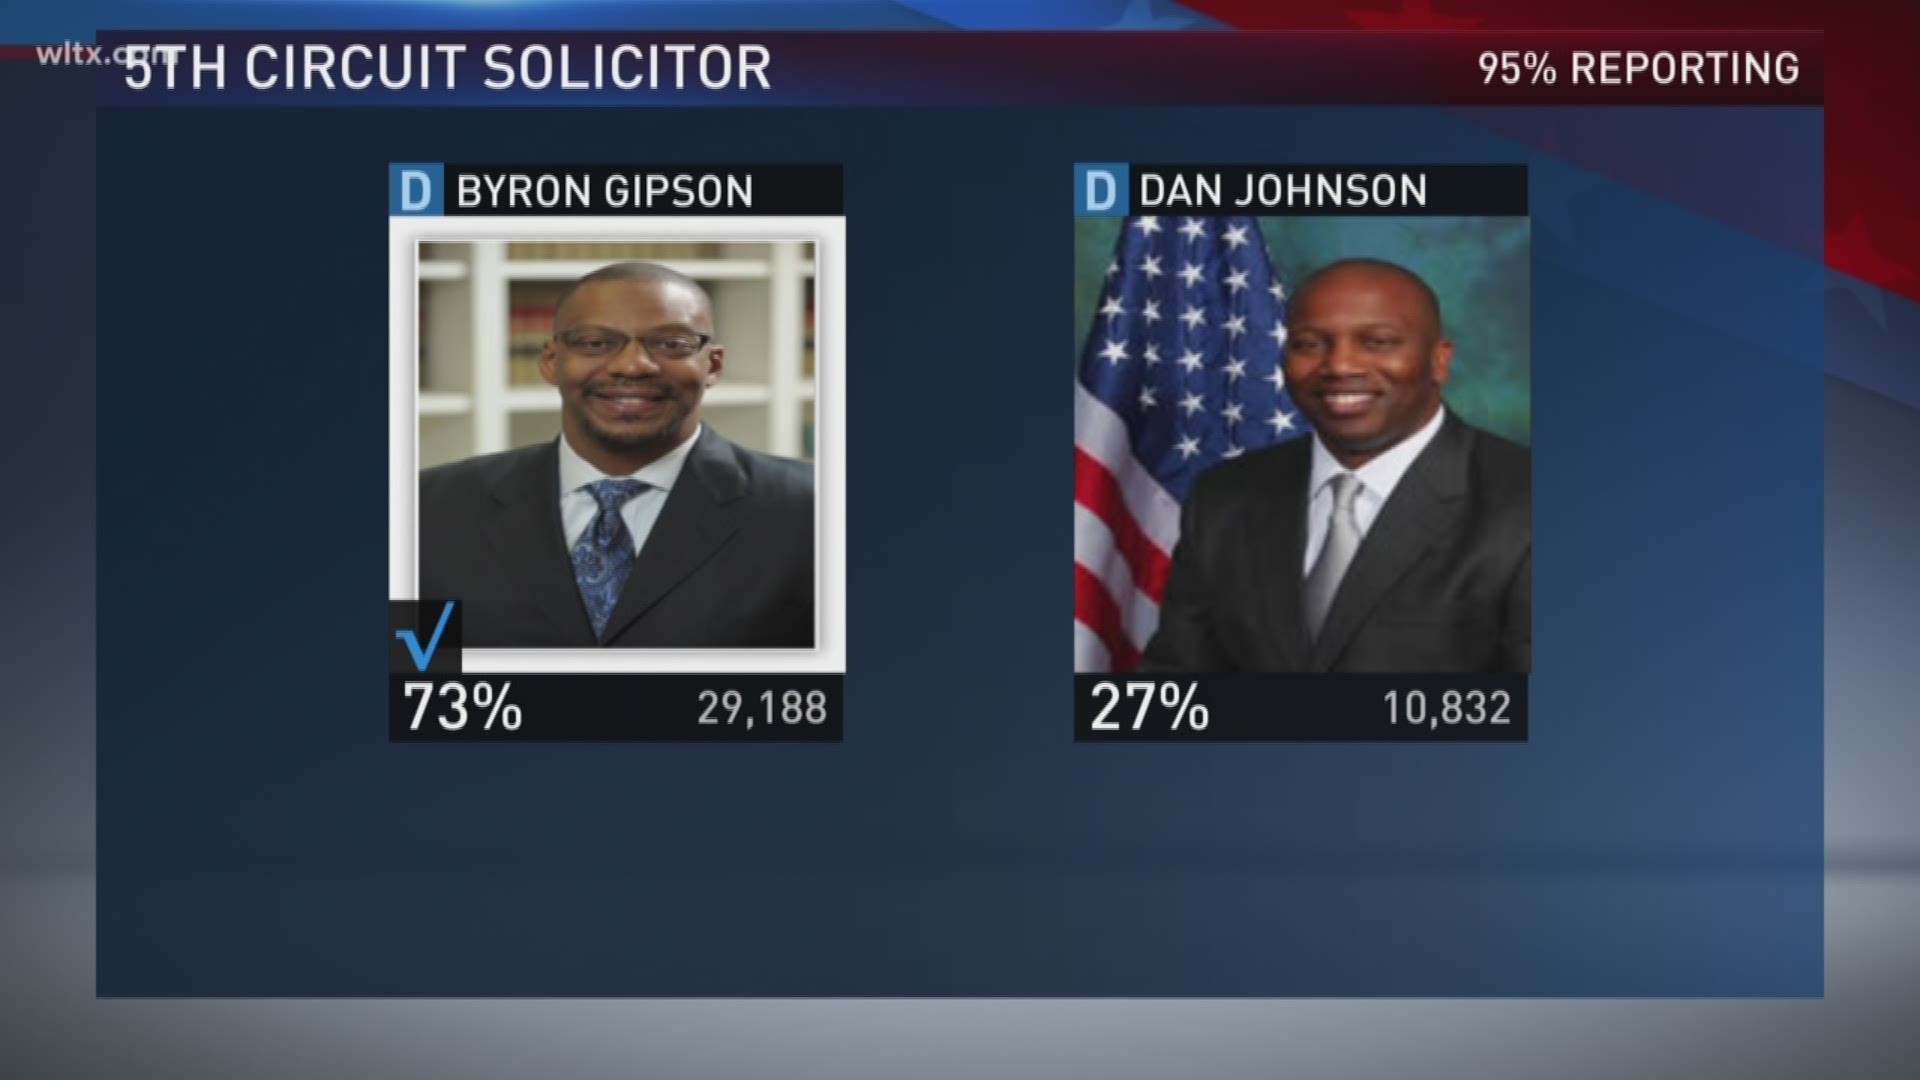 Byron Gipson appears to be headed to victory over the incumbent Dan Johnson 